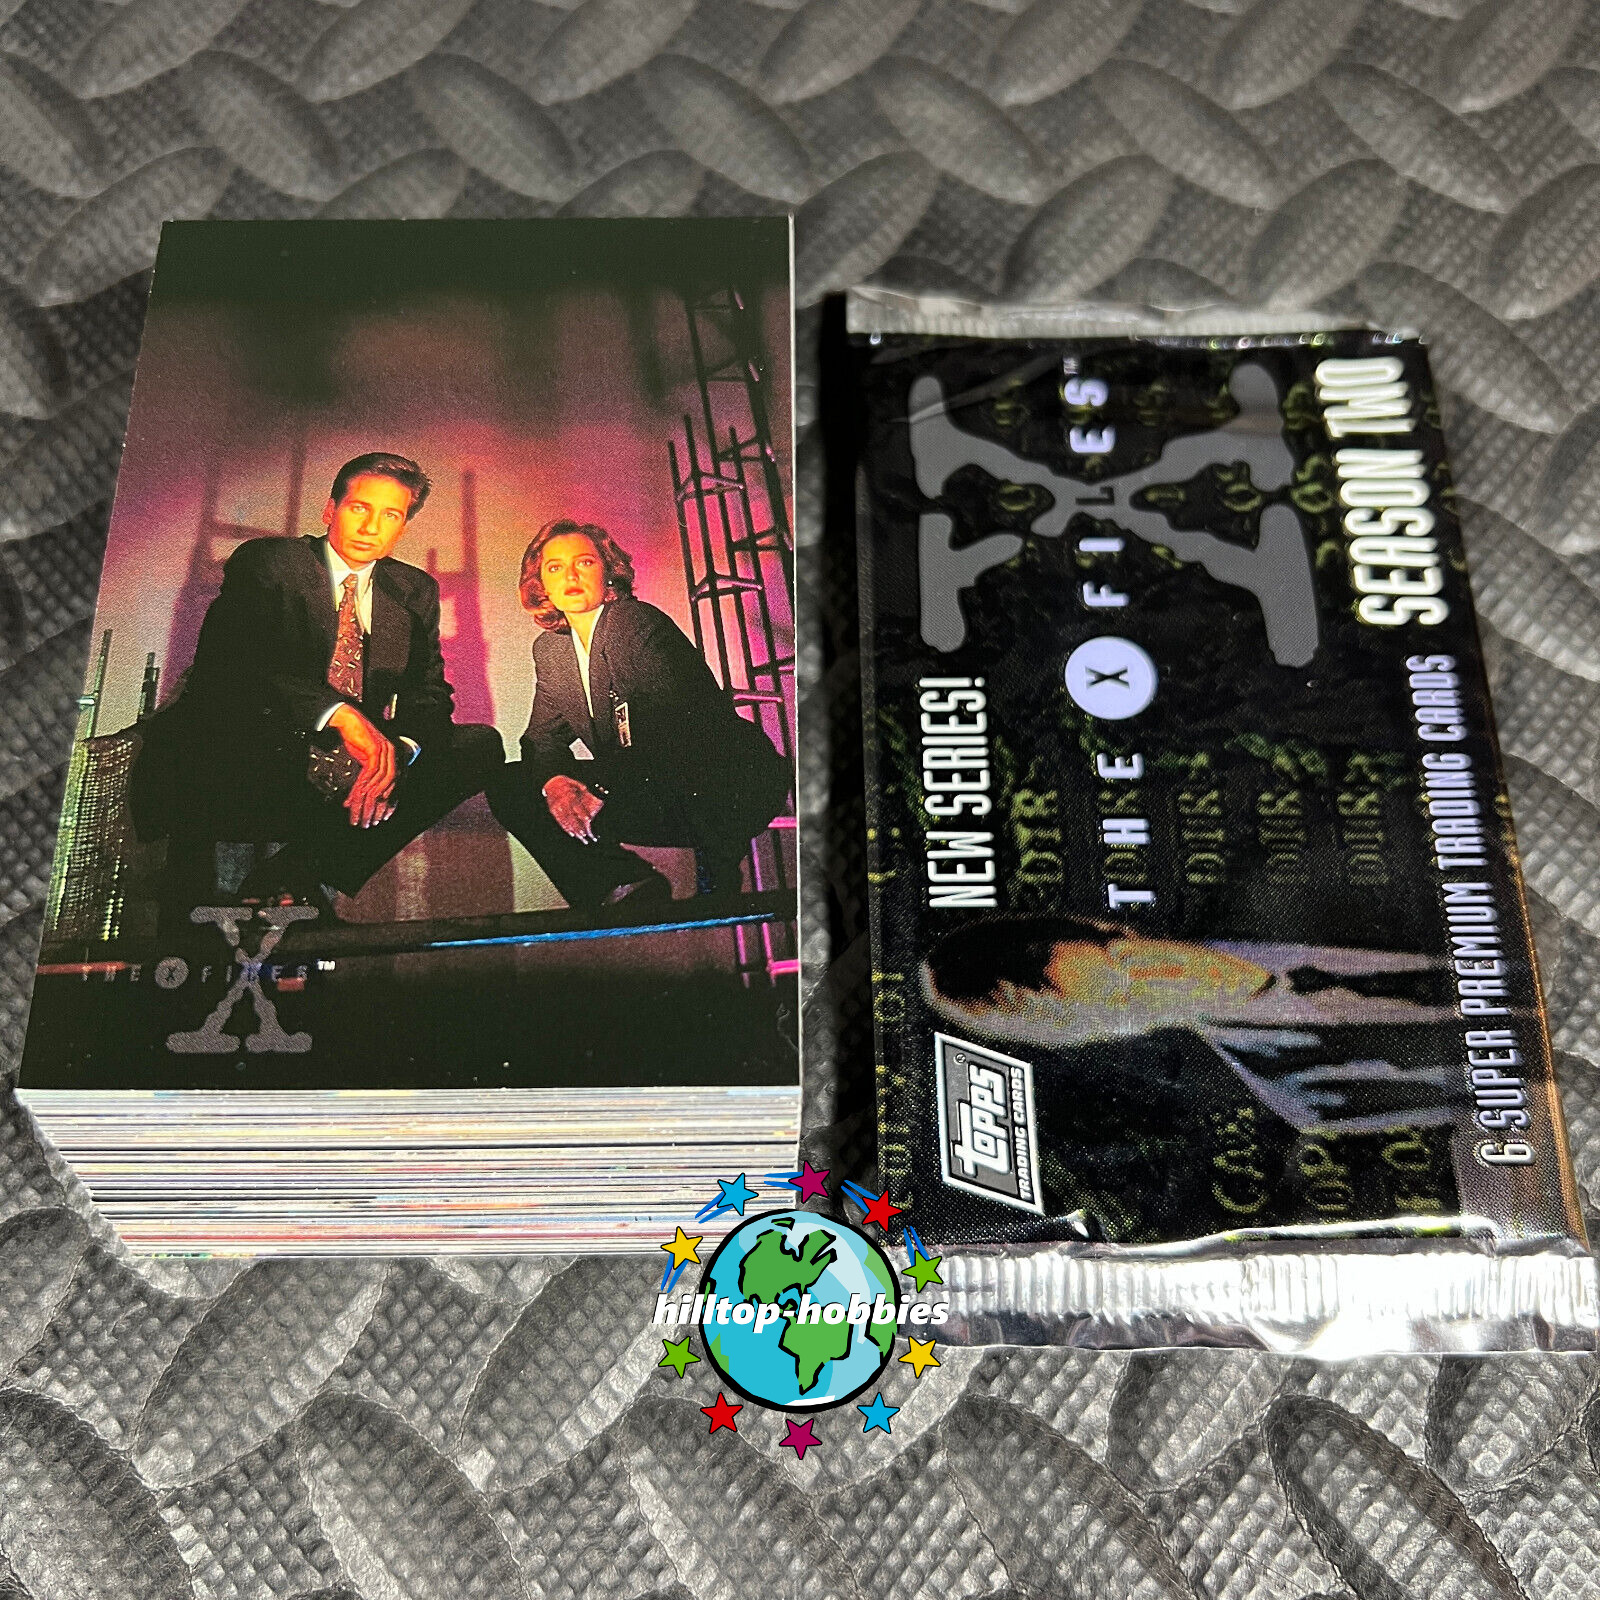 THE X-FILES SEASON 2 COMPLETE 72-CARD TV SHOW TRADING CARDS SET +WRAP 1996 TOPPS